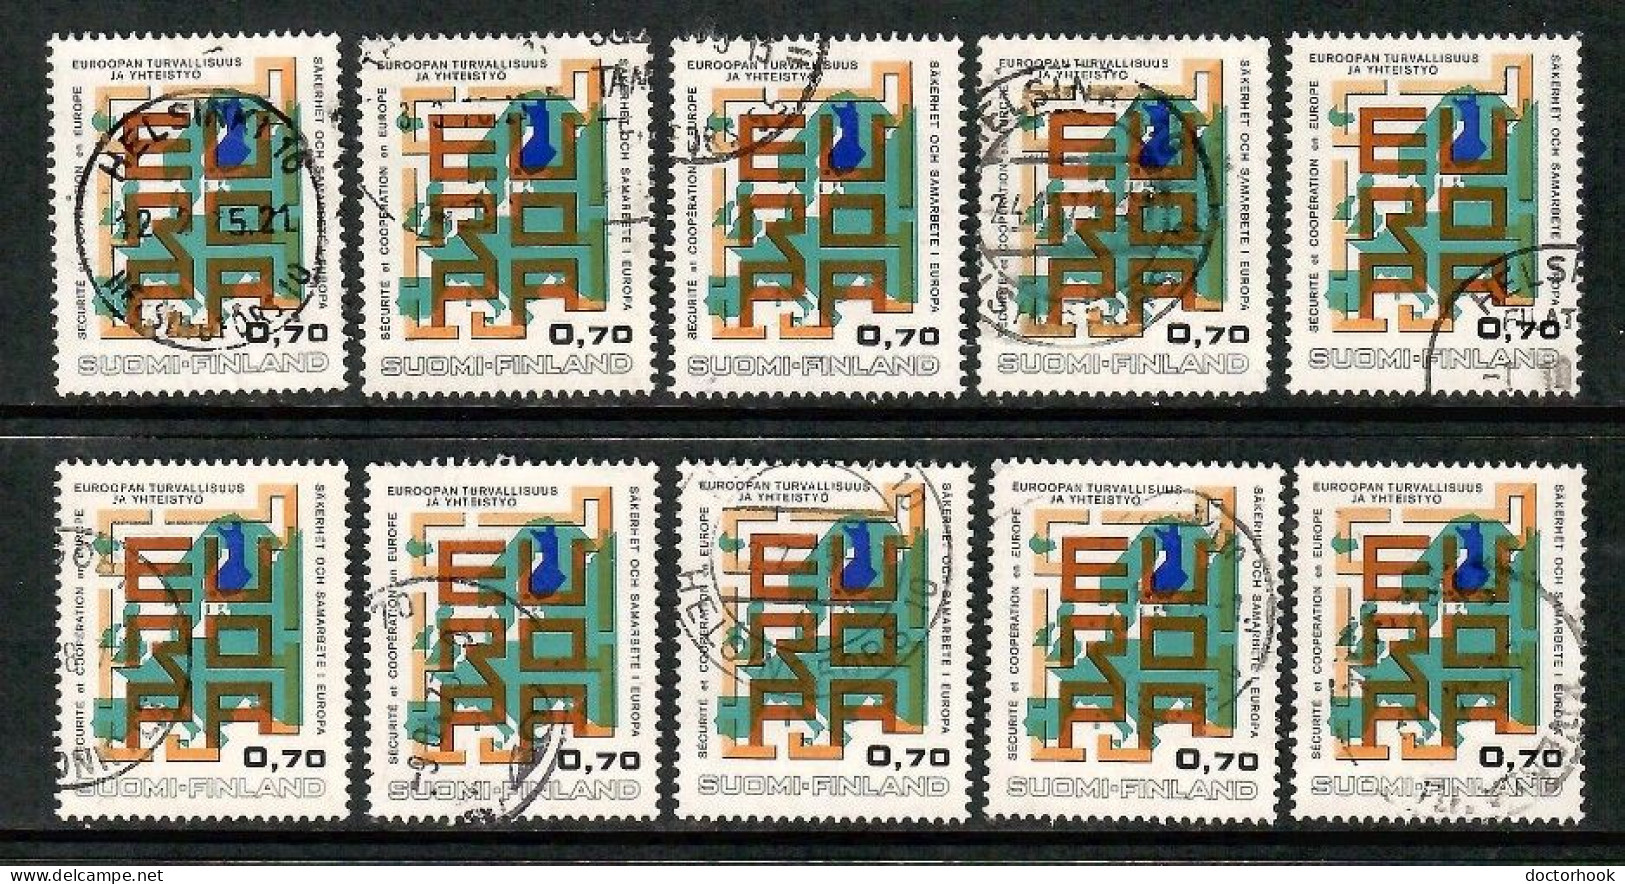 FINLAND   Scott # 529 USED WHOLESALE LOT OF 10 (CONDITION AS PER SCAN) (WH-620) - Colecciones